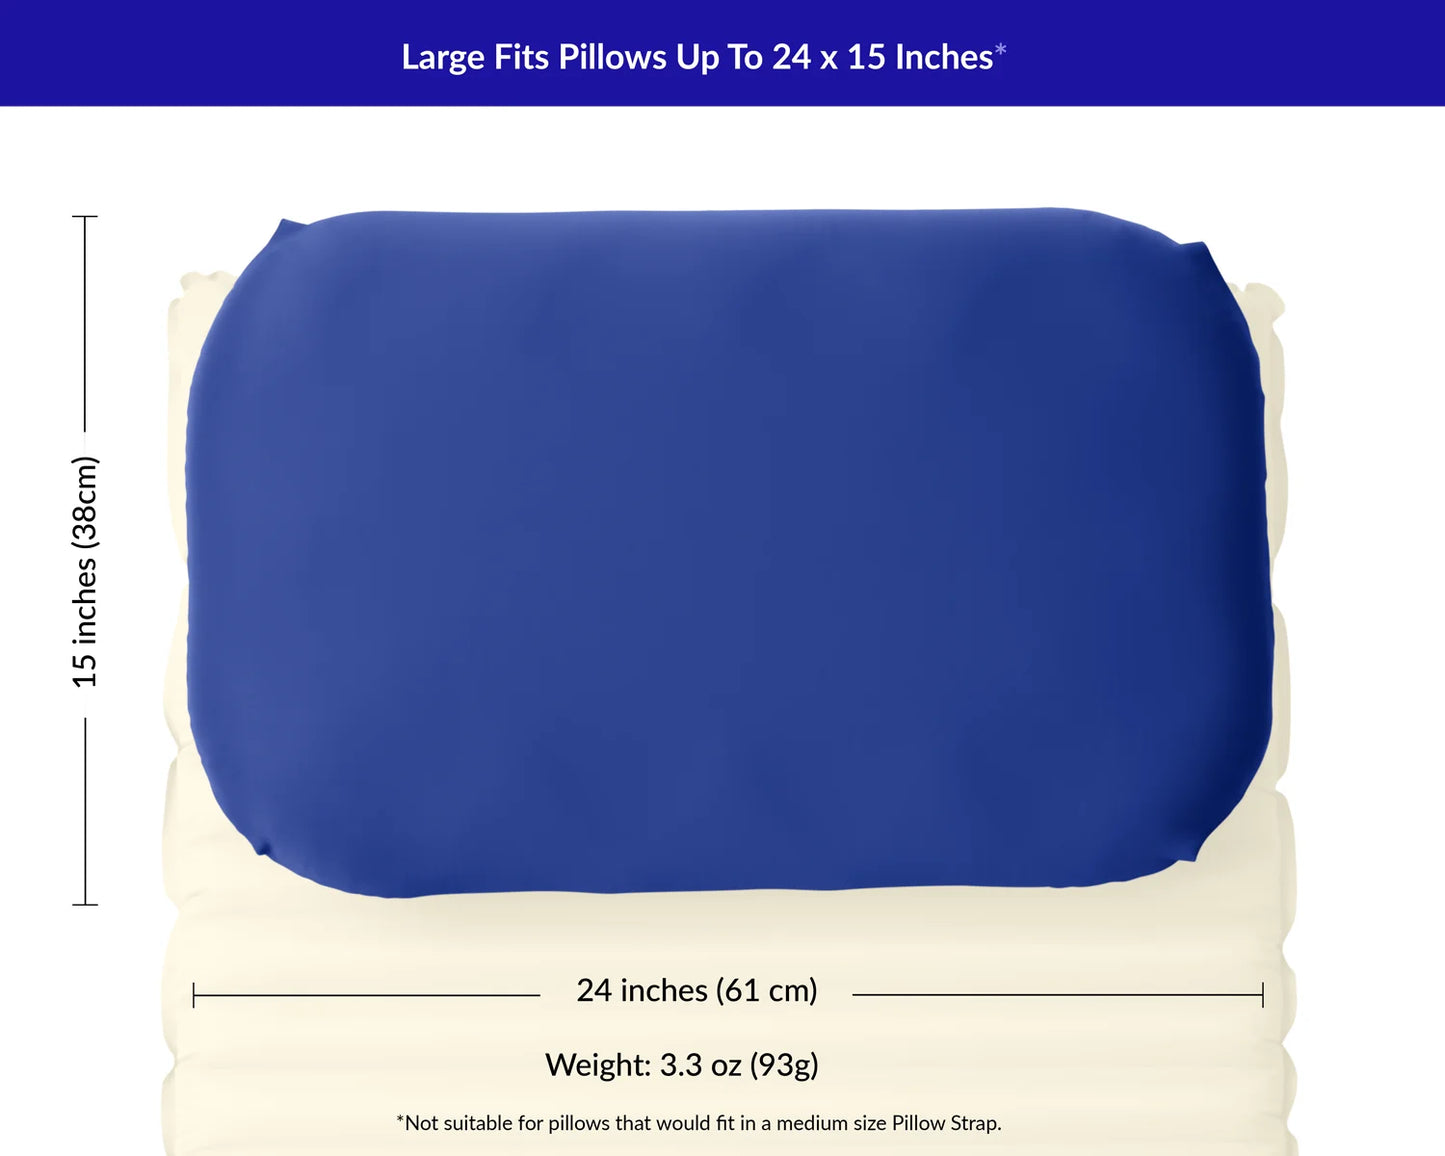 Measurements for maximum camp pillow size for large Pillow Strap is 24 by 15 inches.